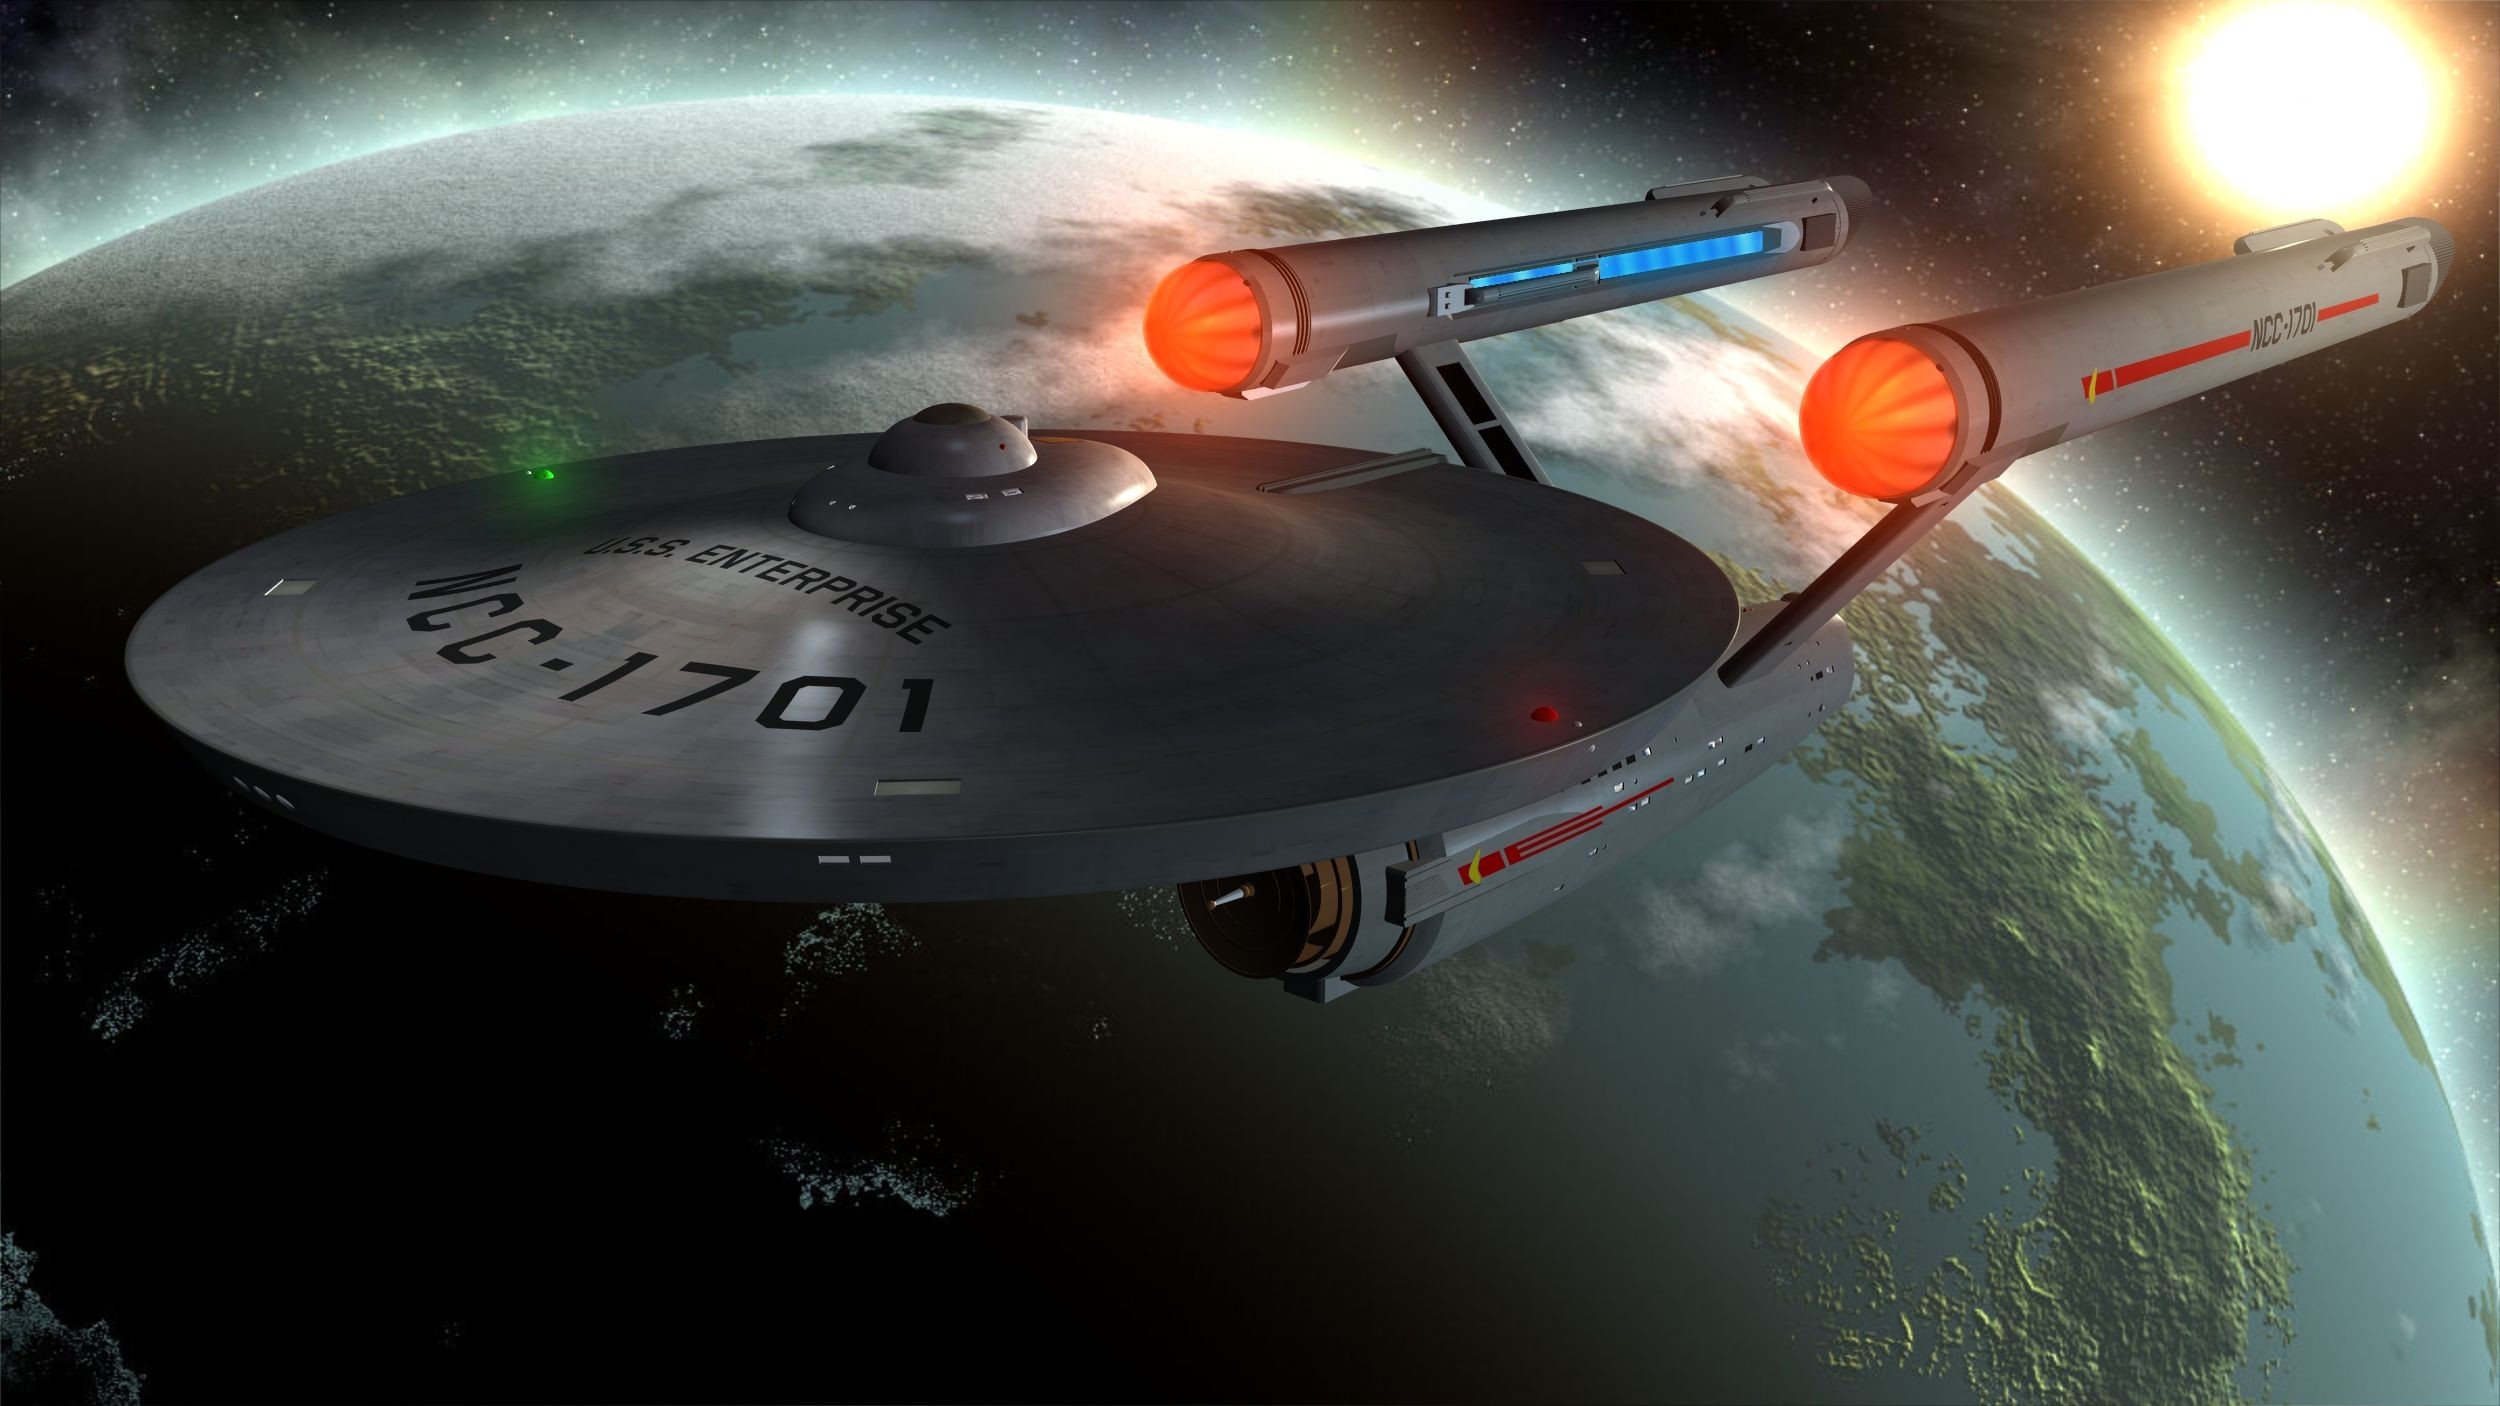 Starship Enterprise Wallpapers 68 Pictures